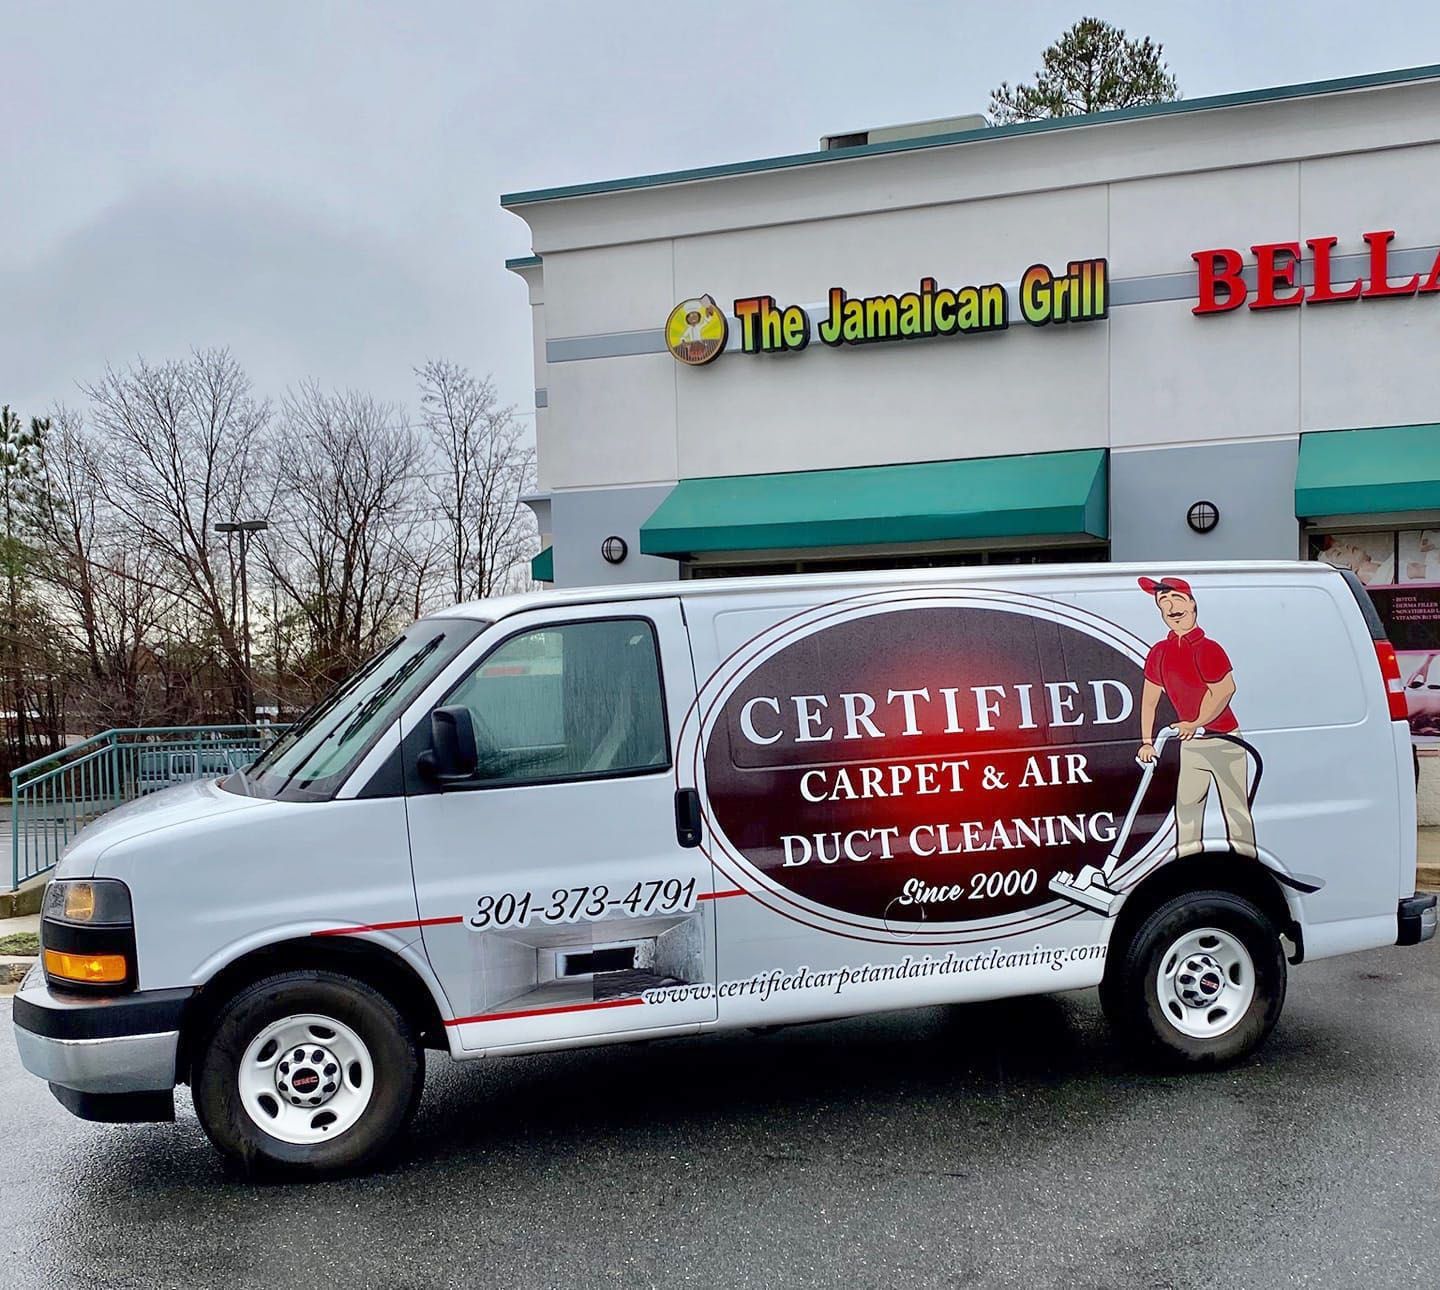 Certified Carpet And Air Duct Cleaning van